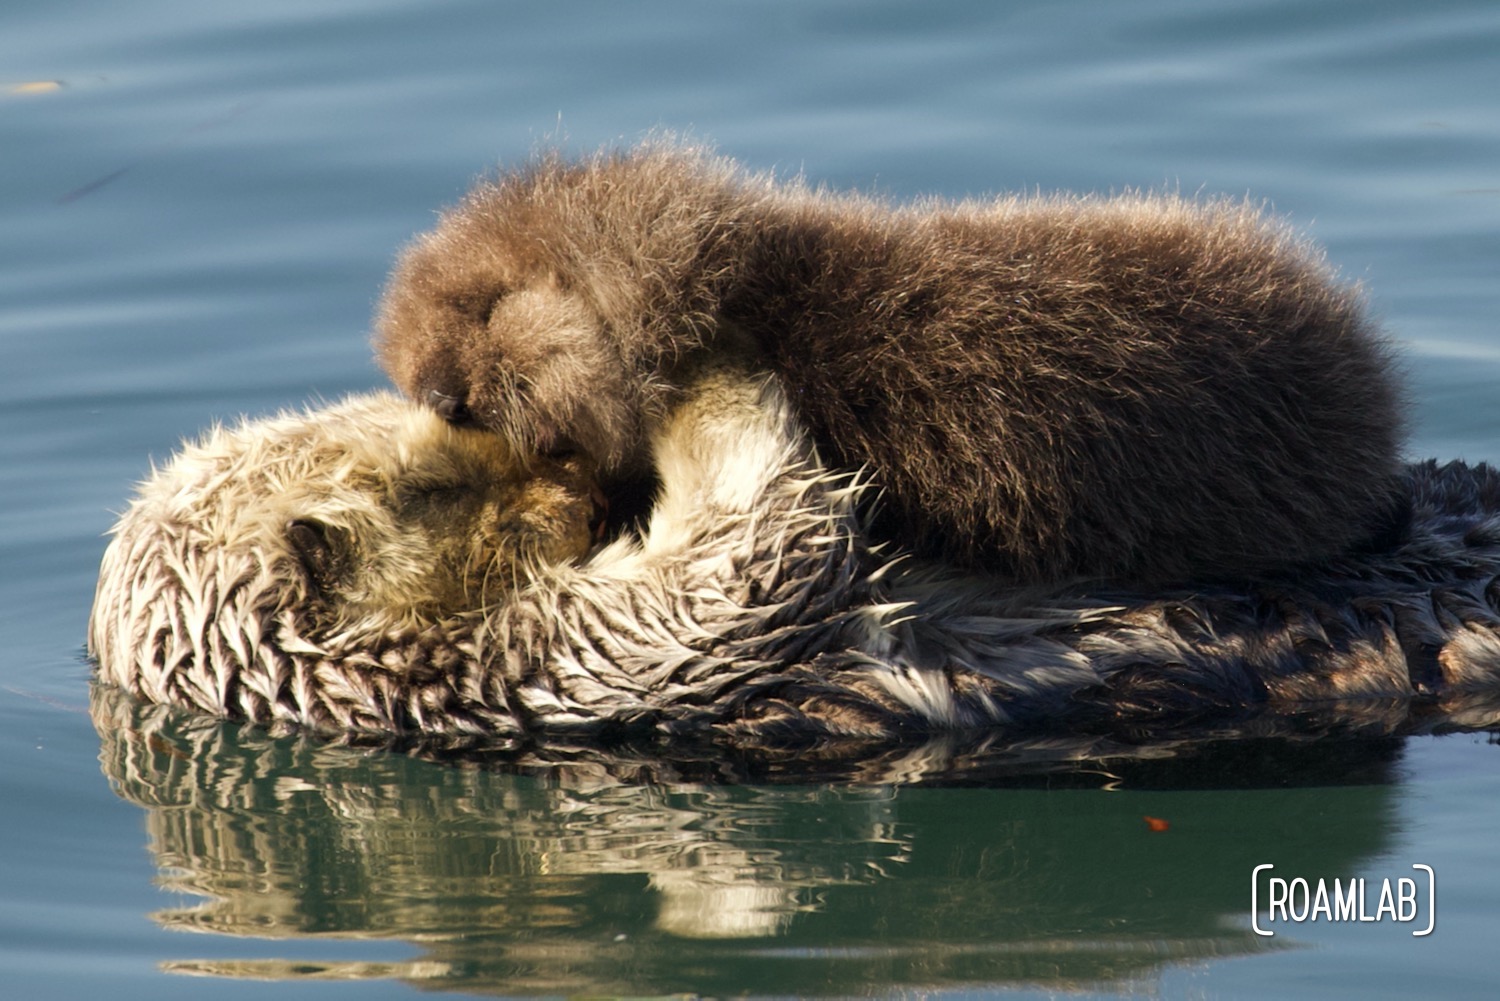 Mother sea otter holding infant nose to nose while floating in Morro Bay, California.